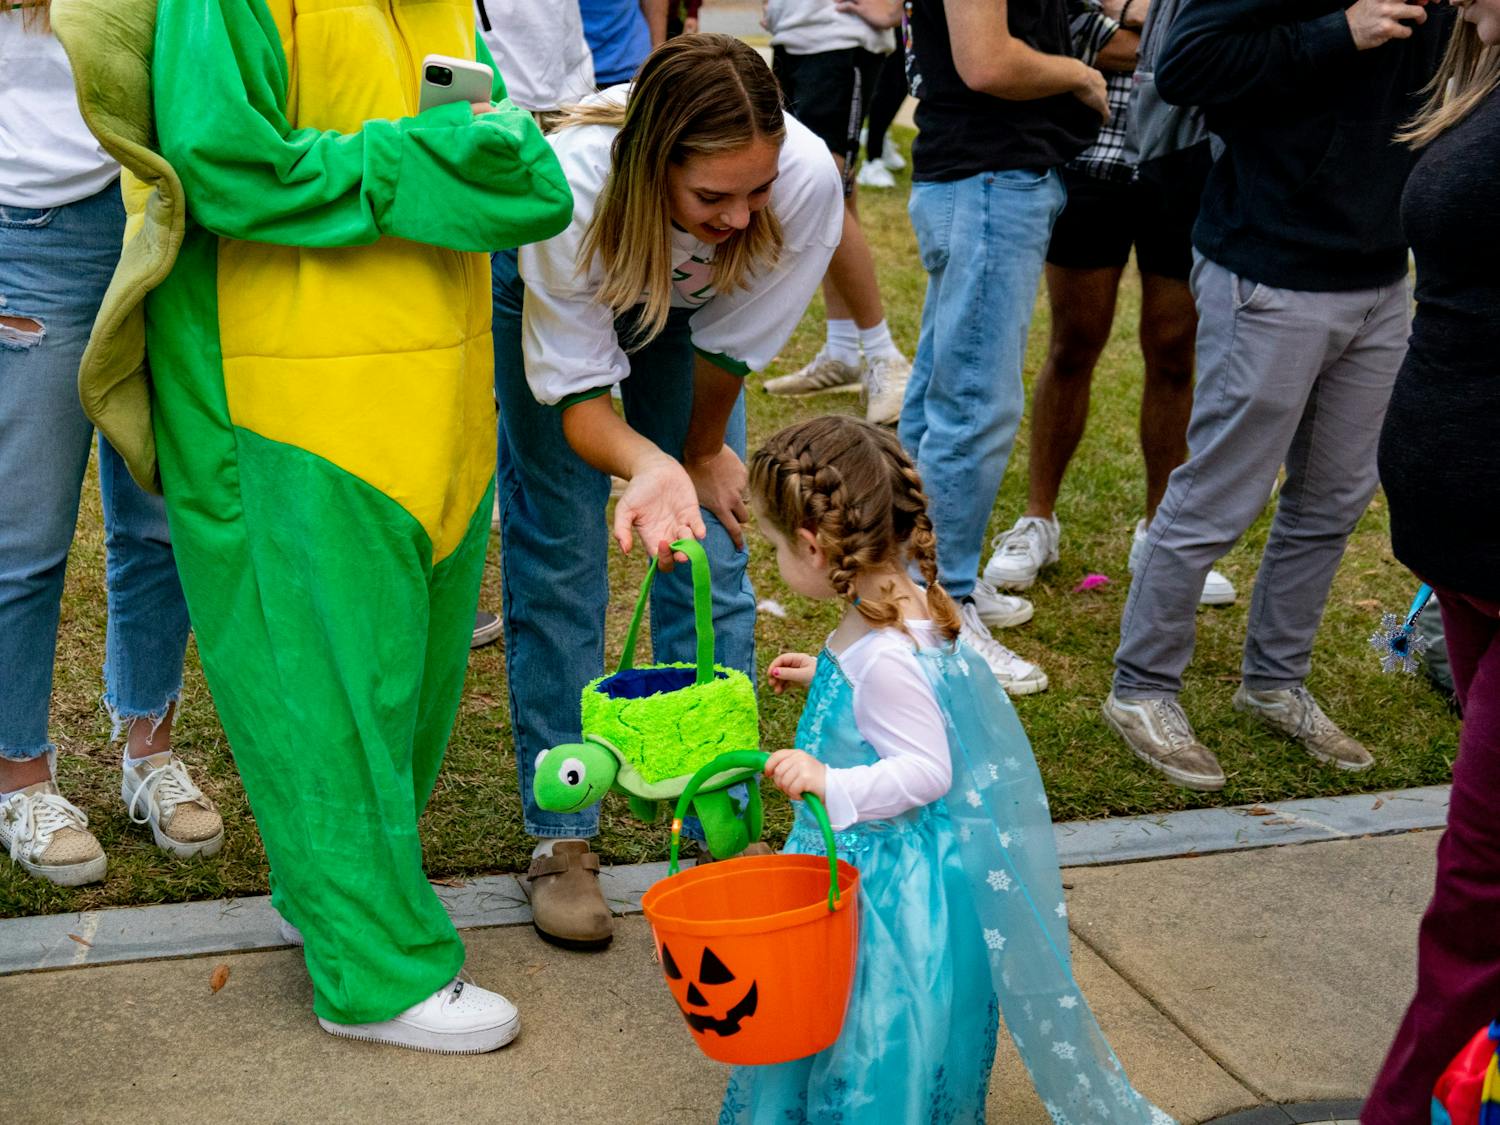 A sorority member hands out candy to a young trick or treater for the Trick or Treat with Greek Halloween event on Oct. 25, 2022. Community members gathered in Greek Village for a community outreach event held by the chapters of USC's sororities and fraternities.